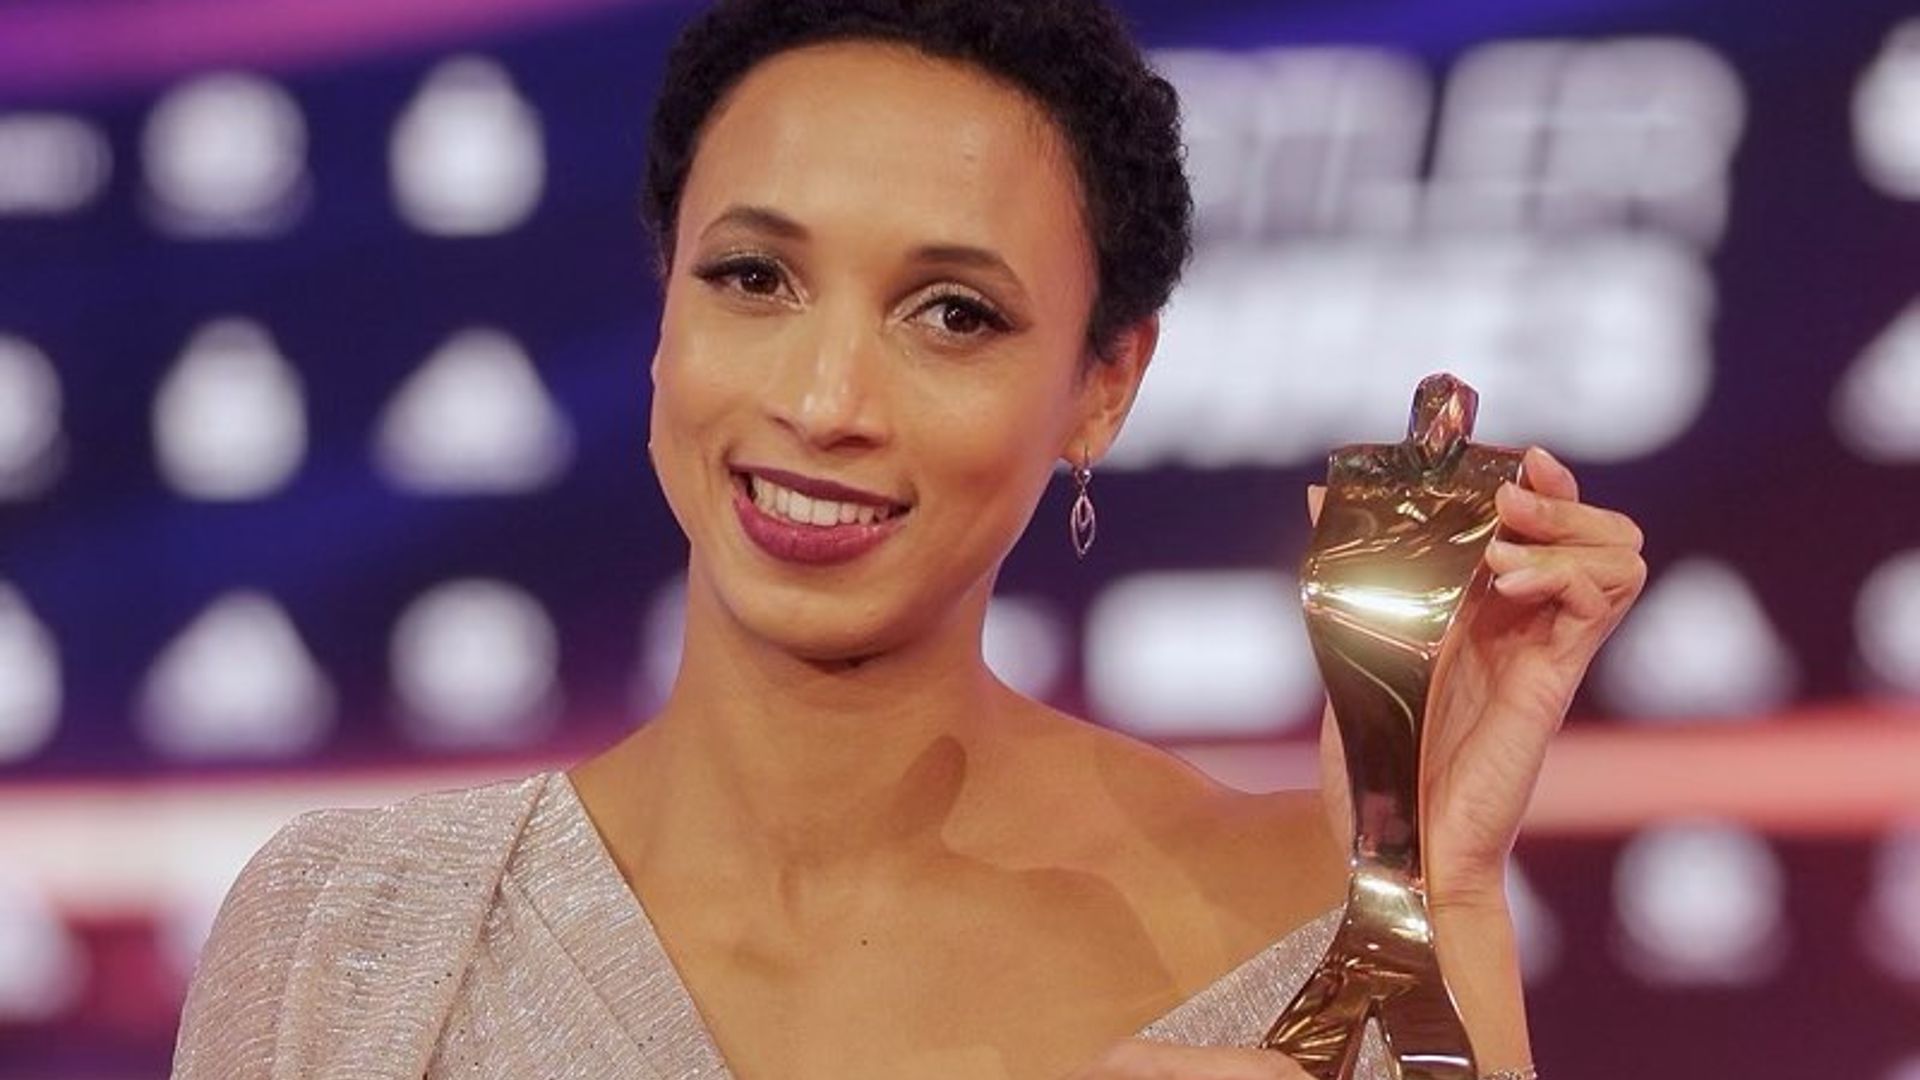 Malaika Mihambo became the German Athlete of the Year for the year 2021 (Image Credits - Instagram/ @mali.mihambo)